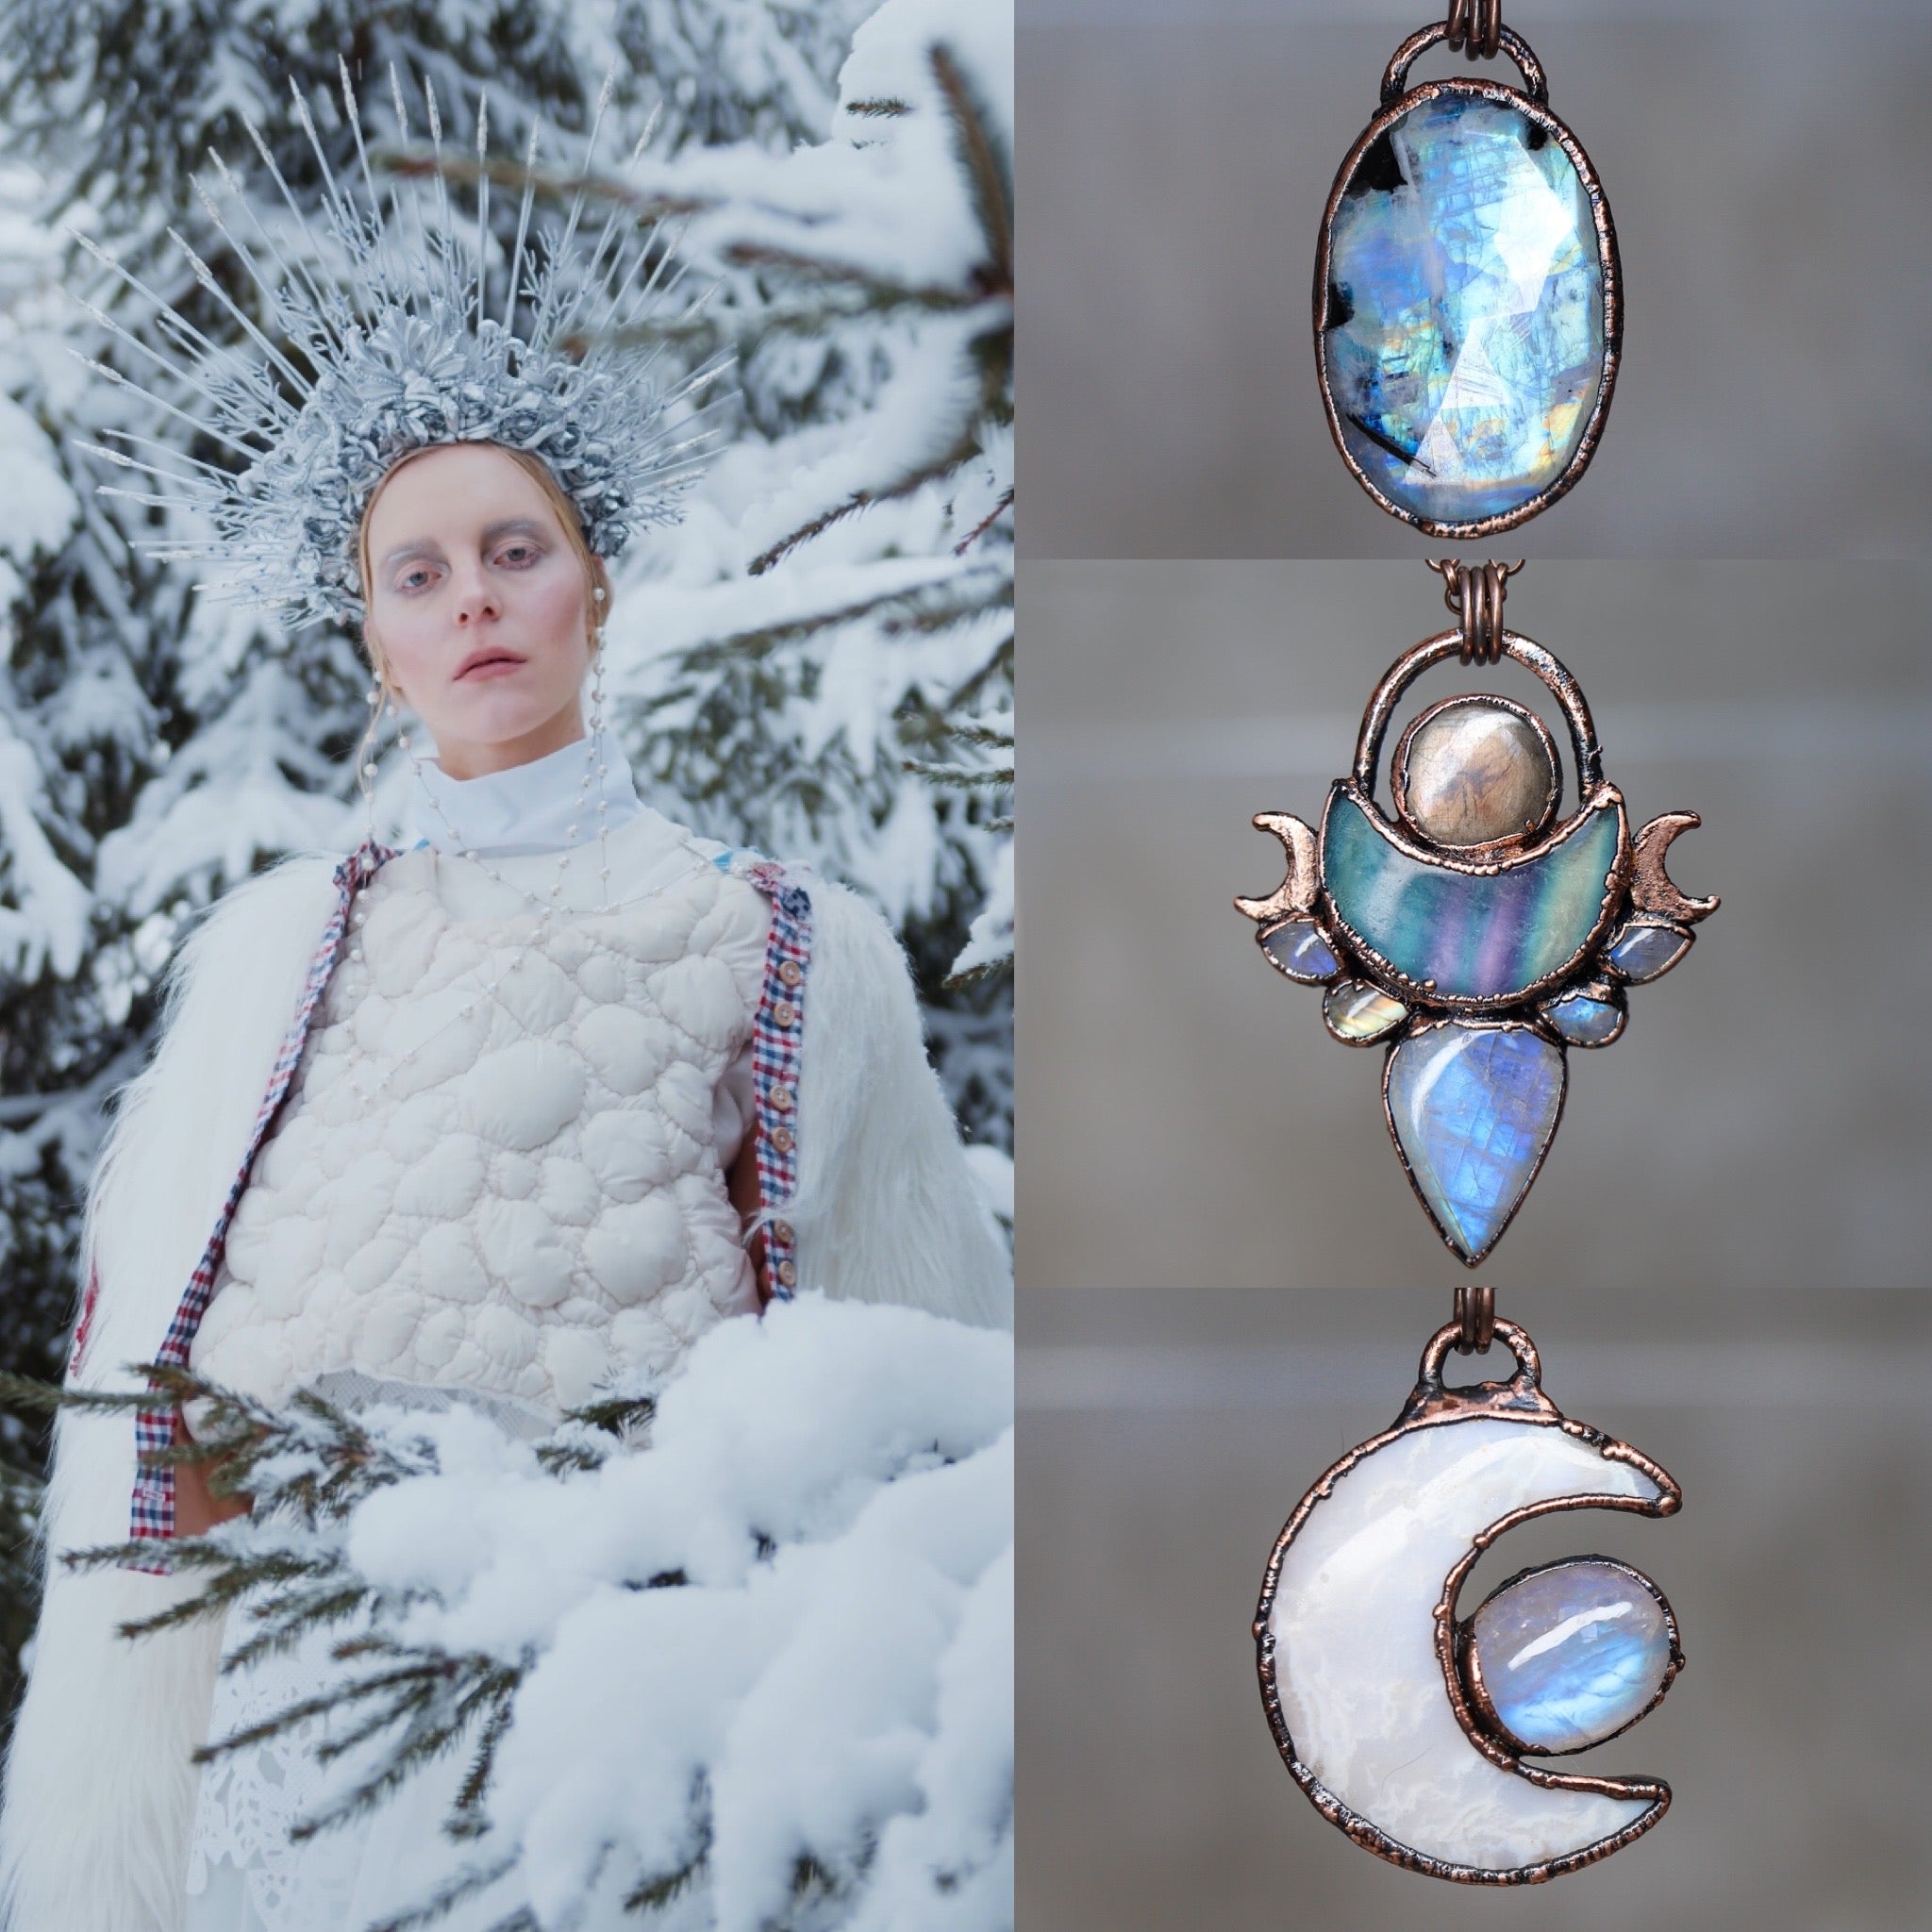 Three fantasy style crystal necklaces inspired by Scottish myth and legend